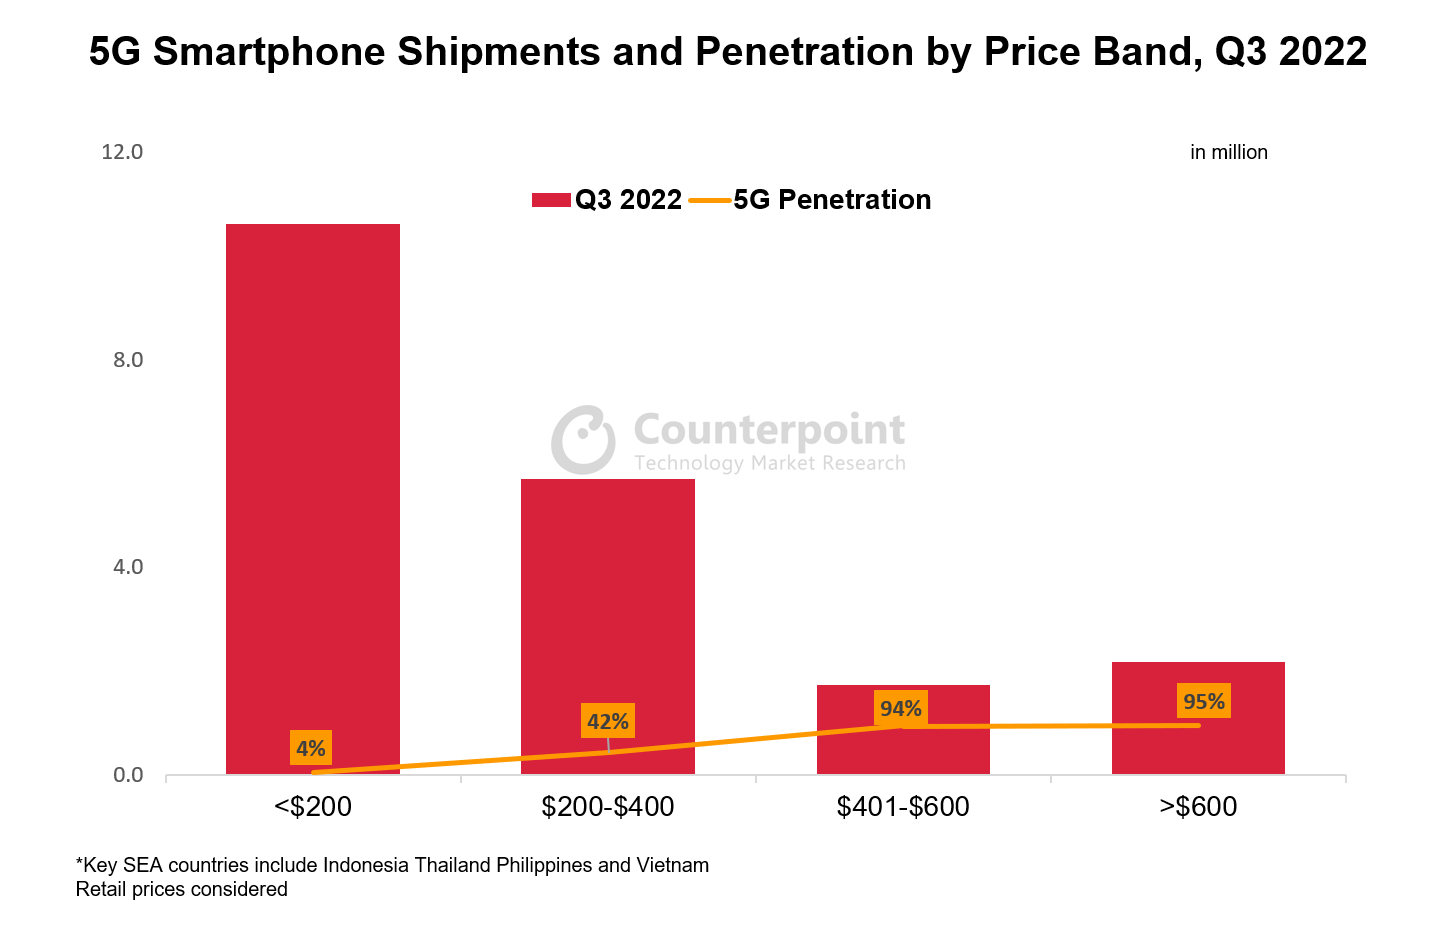 5G Smartphone Shipments and Penetration by Price Band Q3 2022